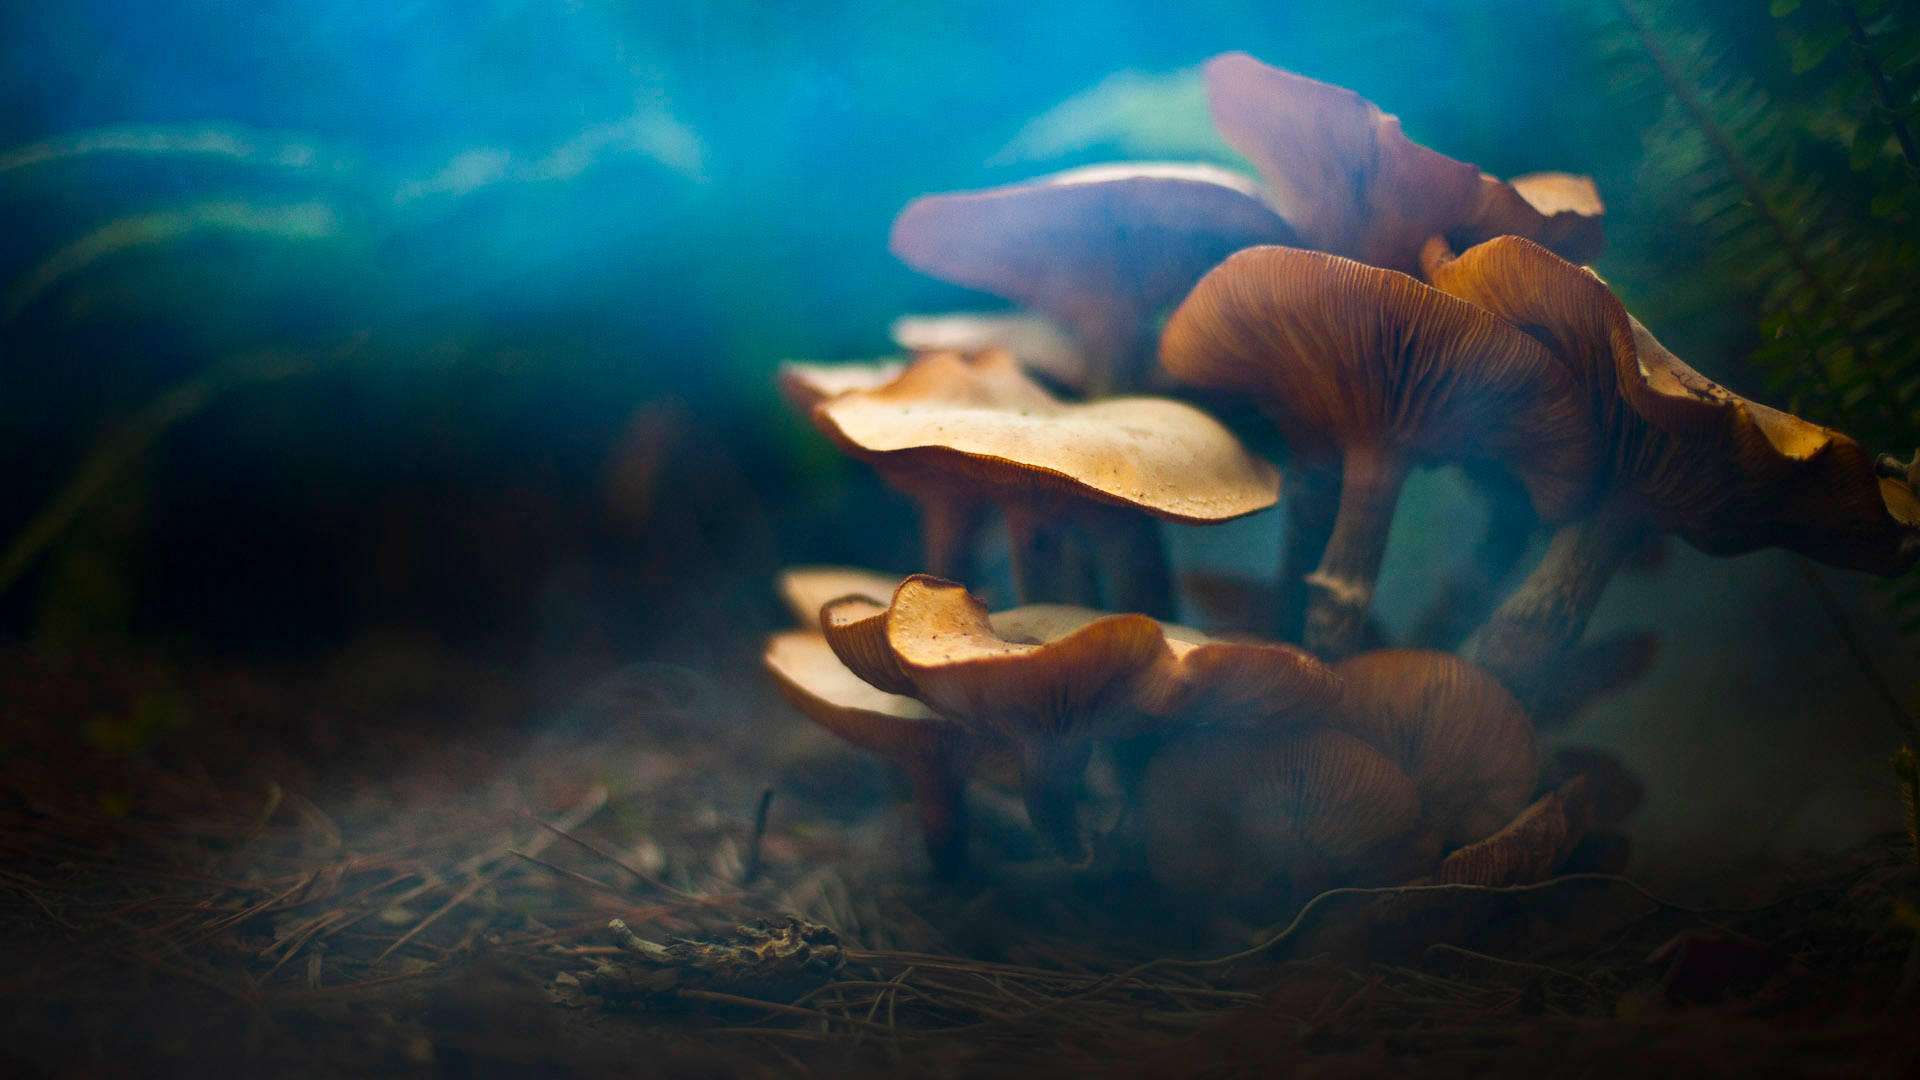 Cluster Of Cute Wavy Mushrooms And Blue Filter